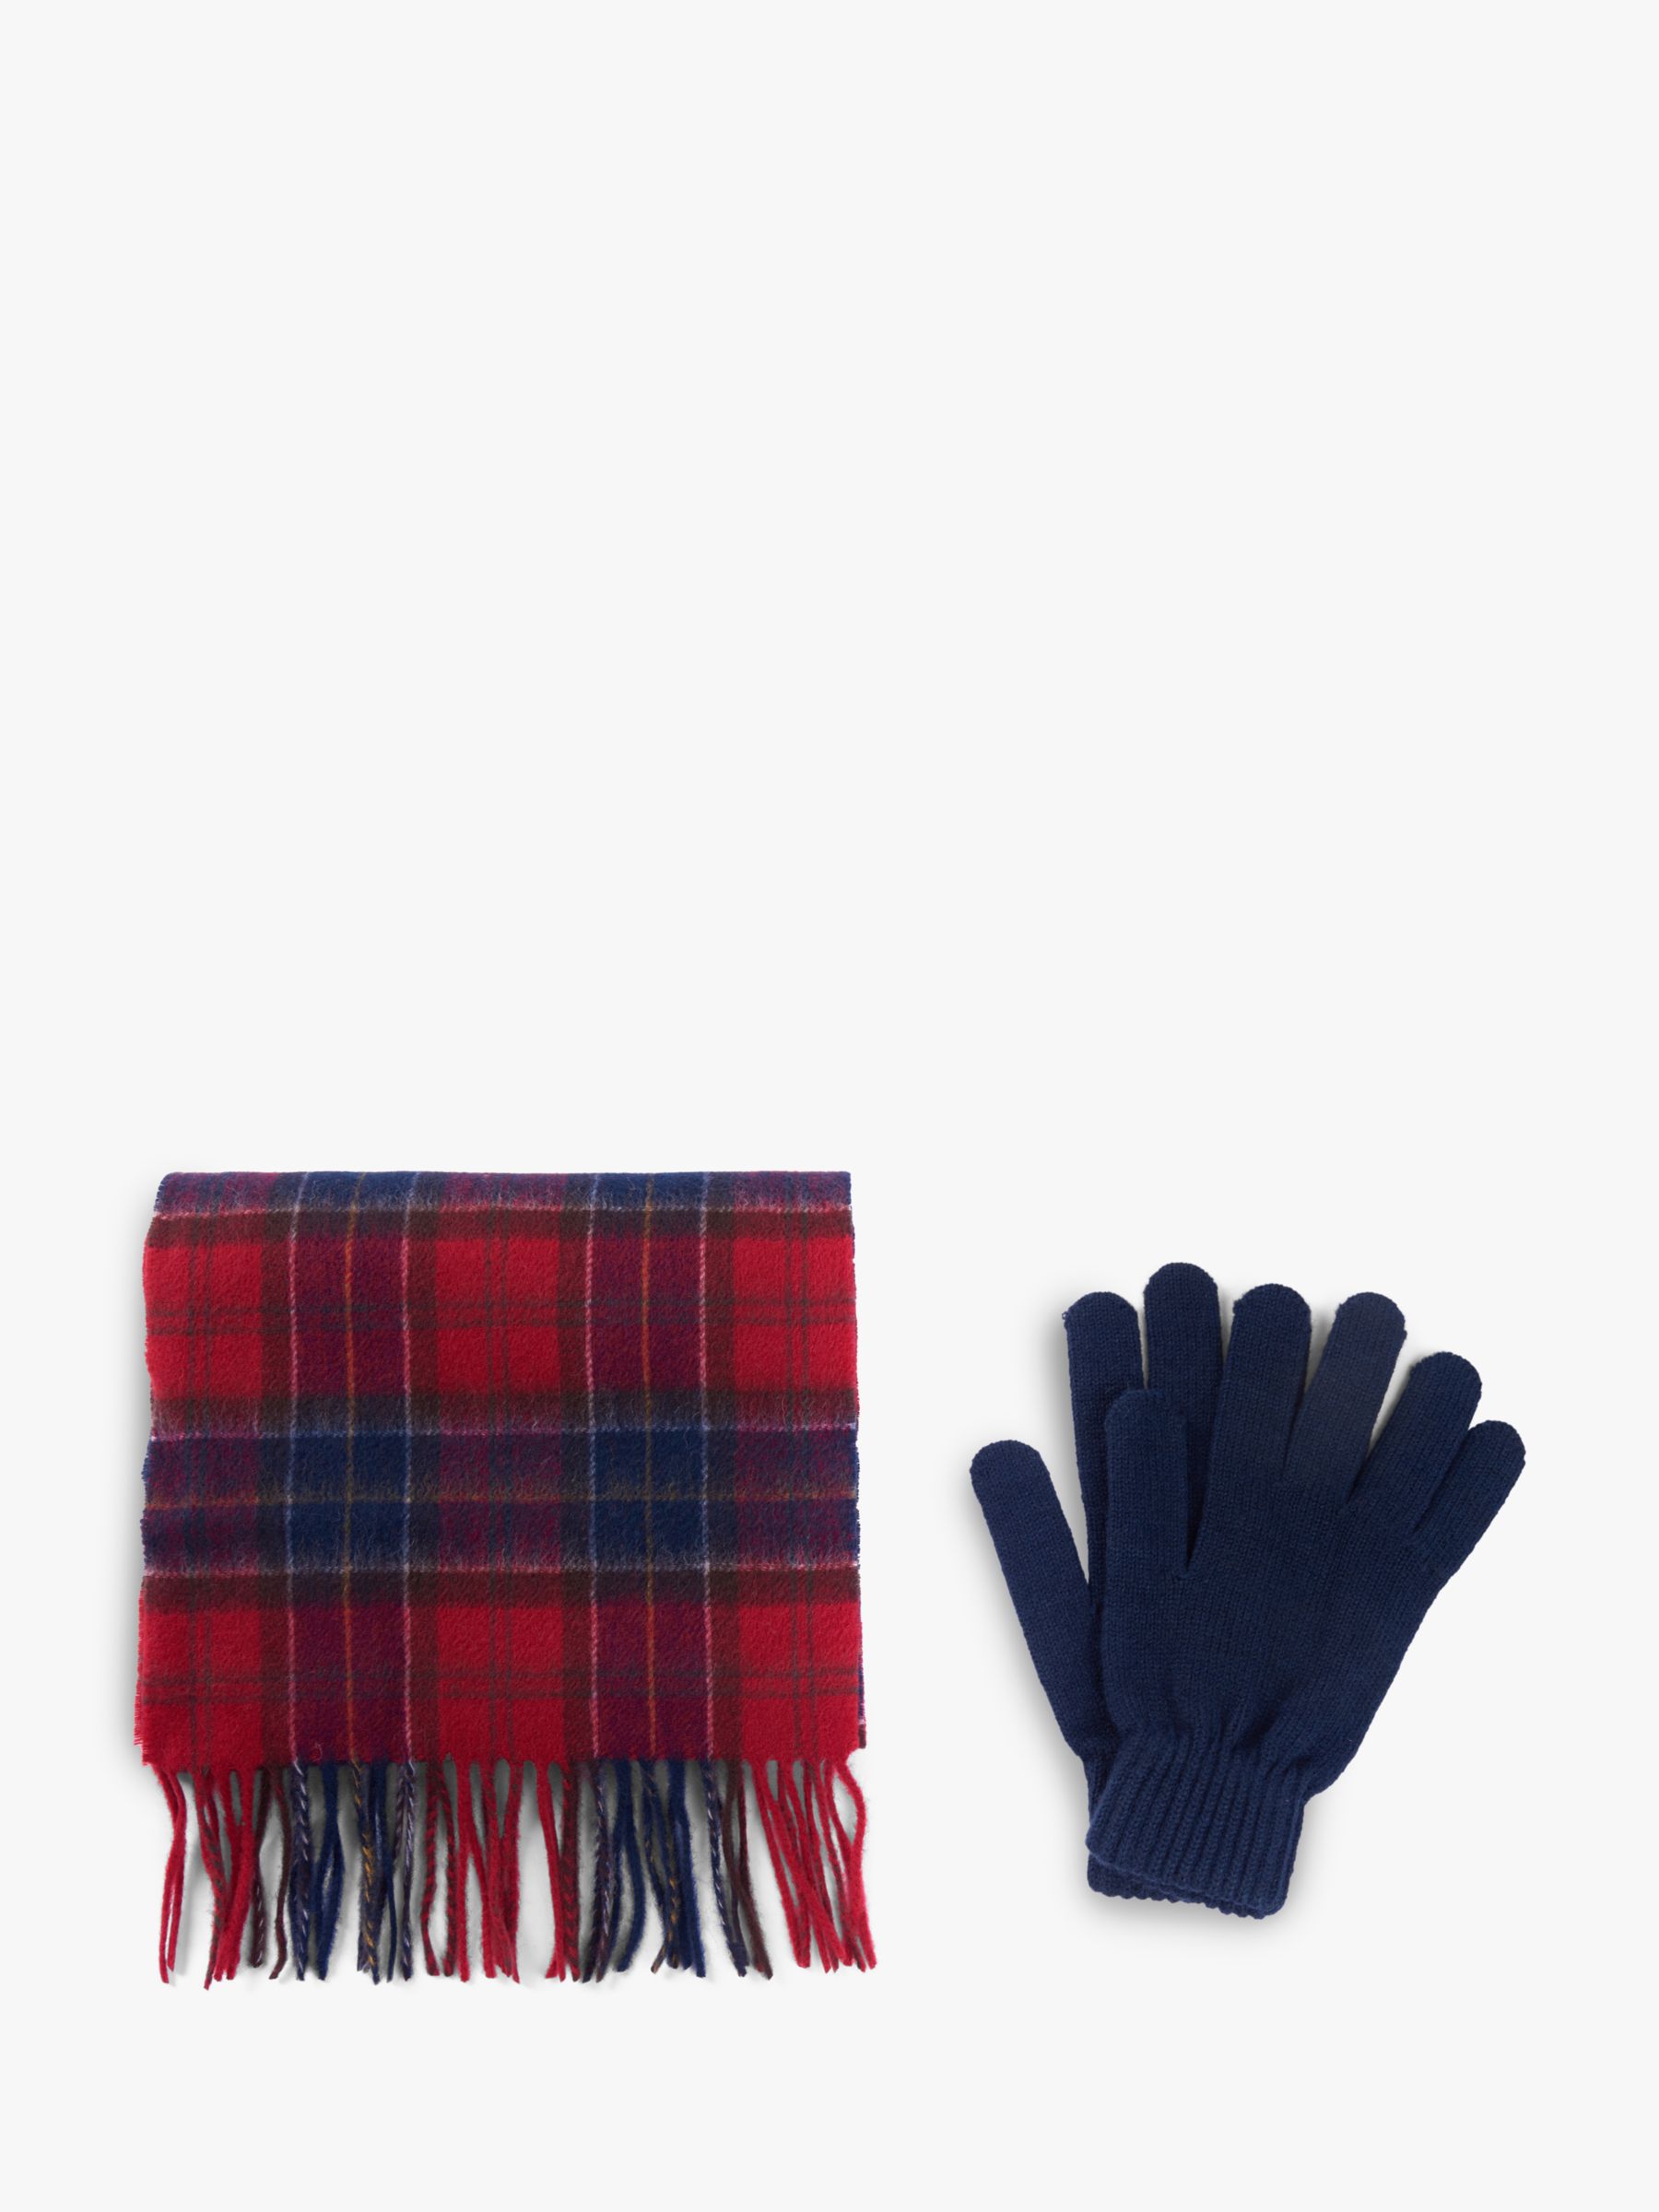 barbour scarf and glove gift set